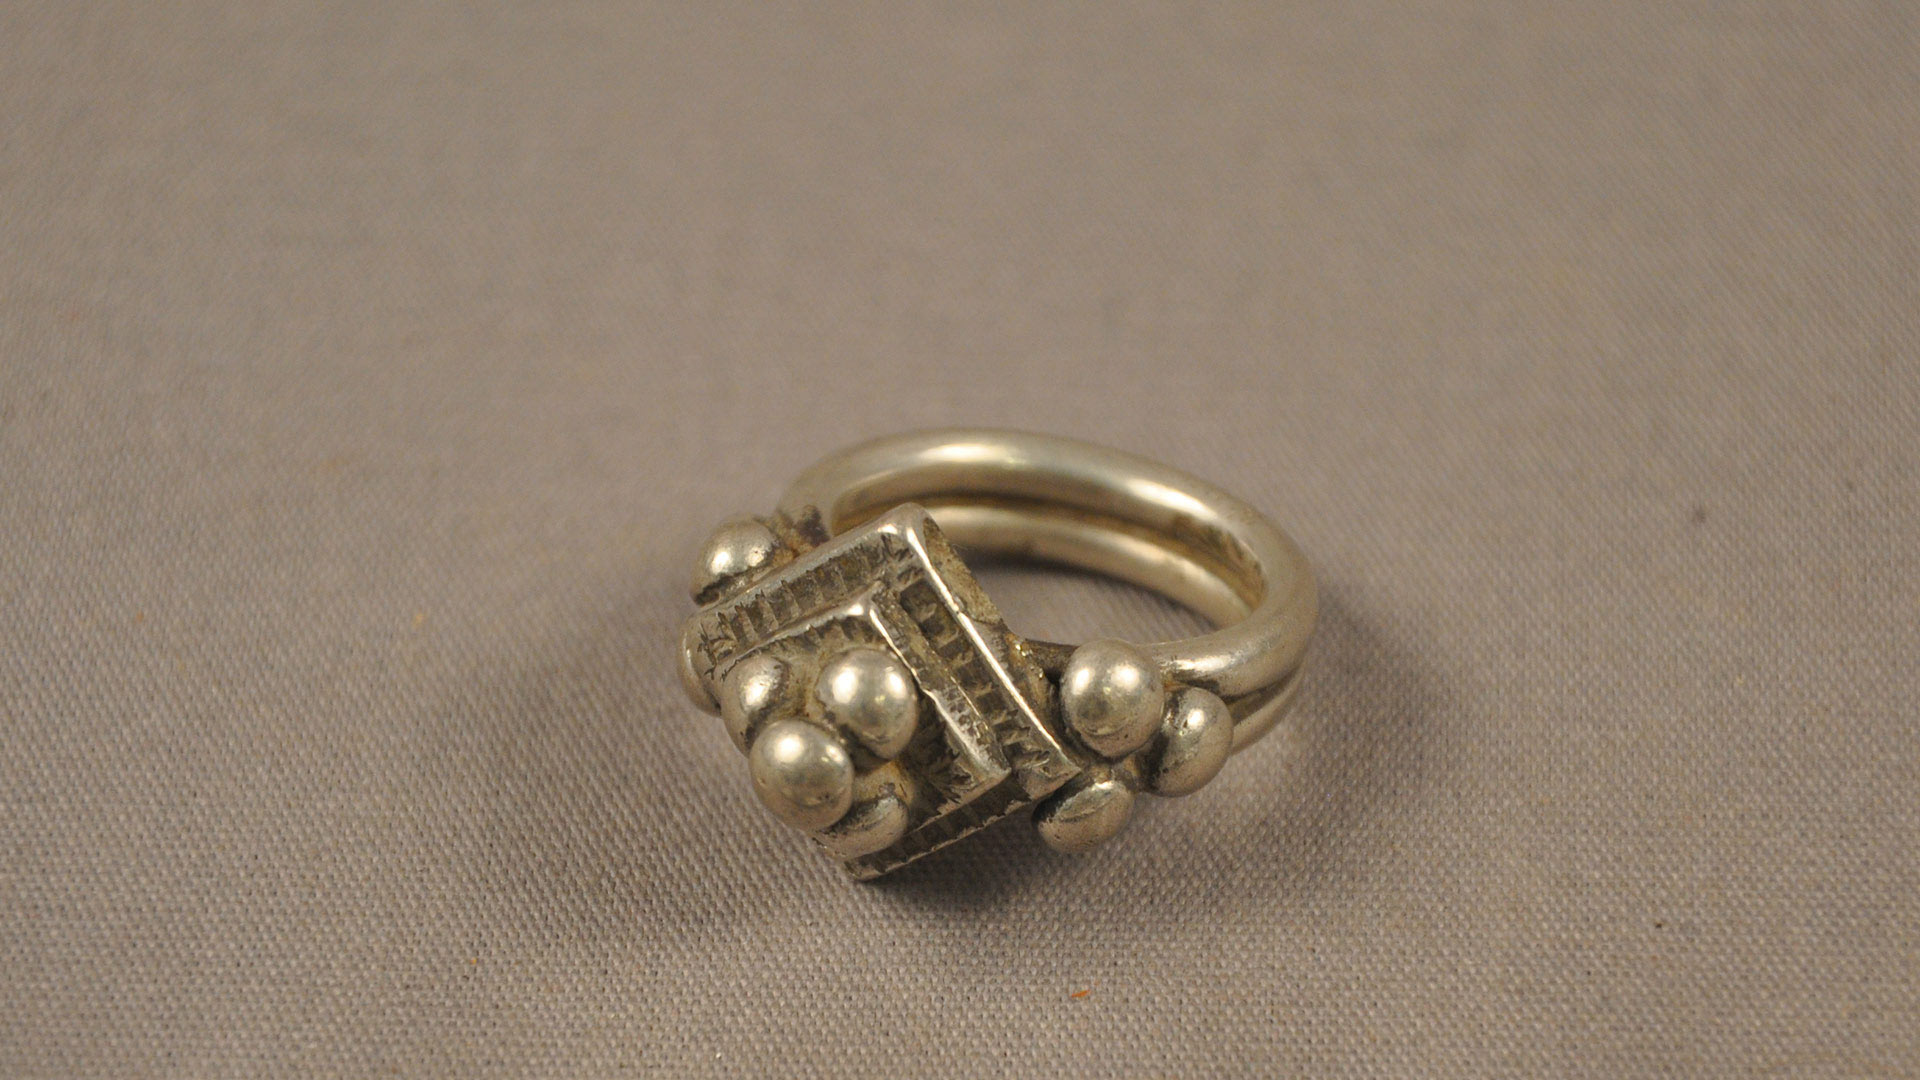 A silver-colored metallic ring with an indentation running through its band. It has an attachment consisting of two flat, silver-colored squares with four circular silver colored objects on top of the smaller square. On both of the sides of the squares are three circular silver colored objects.